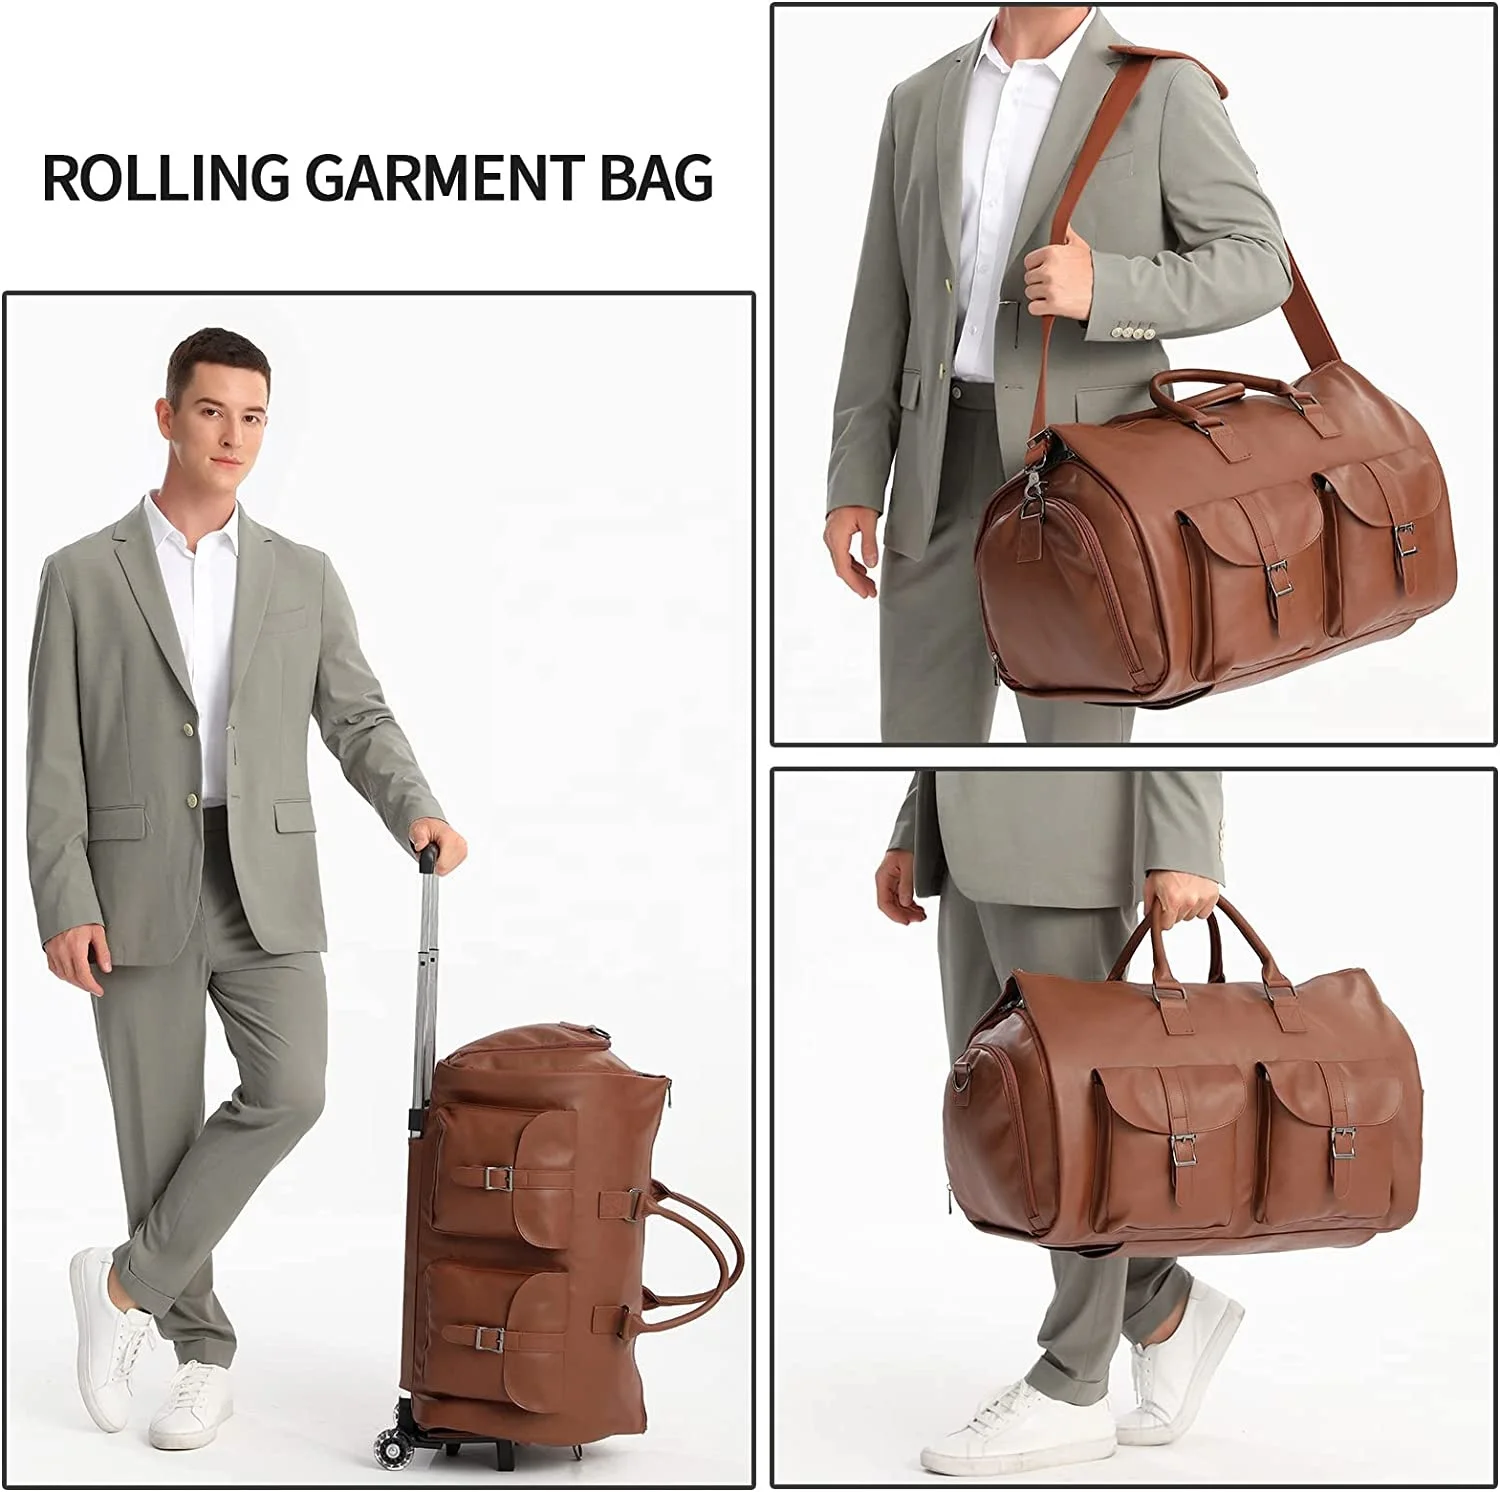 Customized Duffel Garment Bags For Travel Brown Carry On Bag Weekender ...